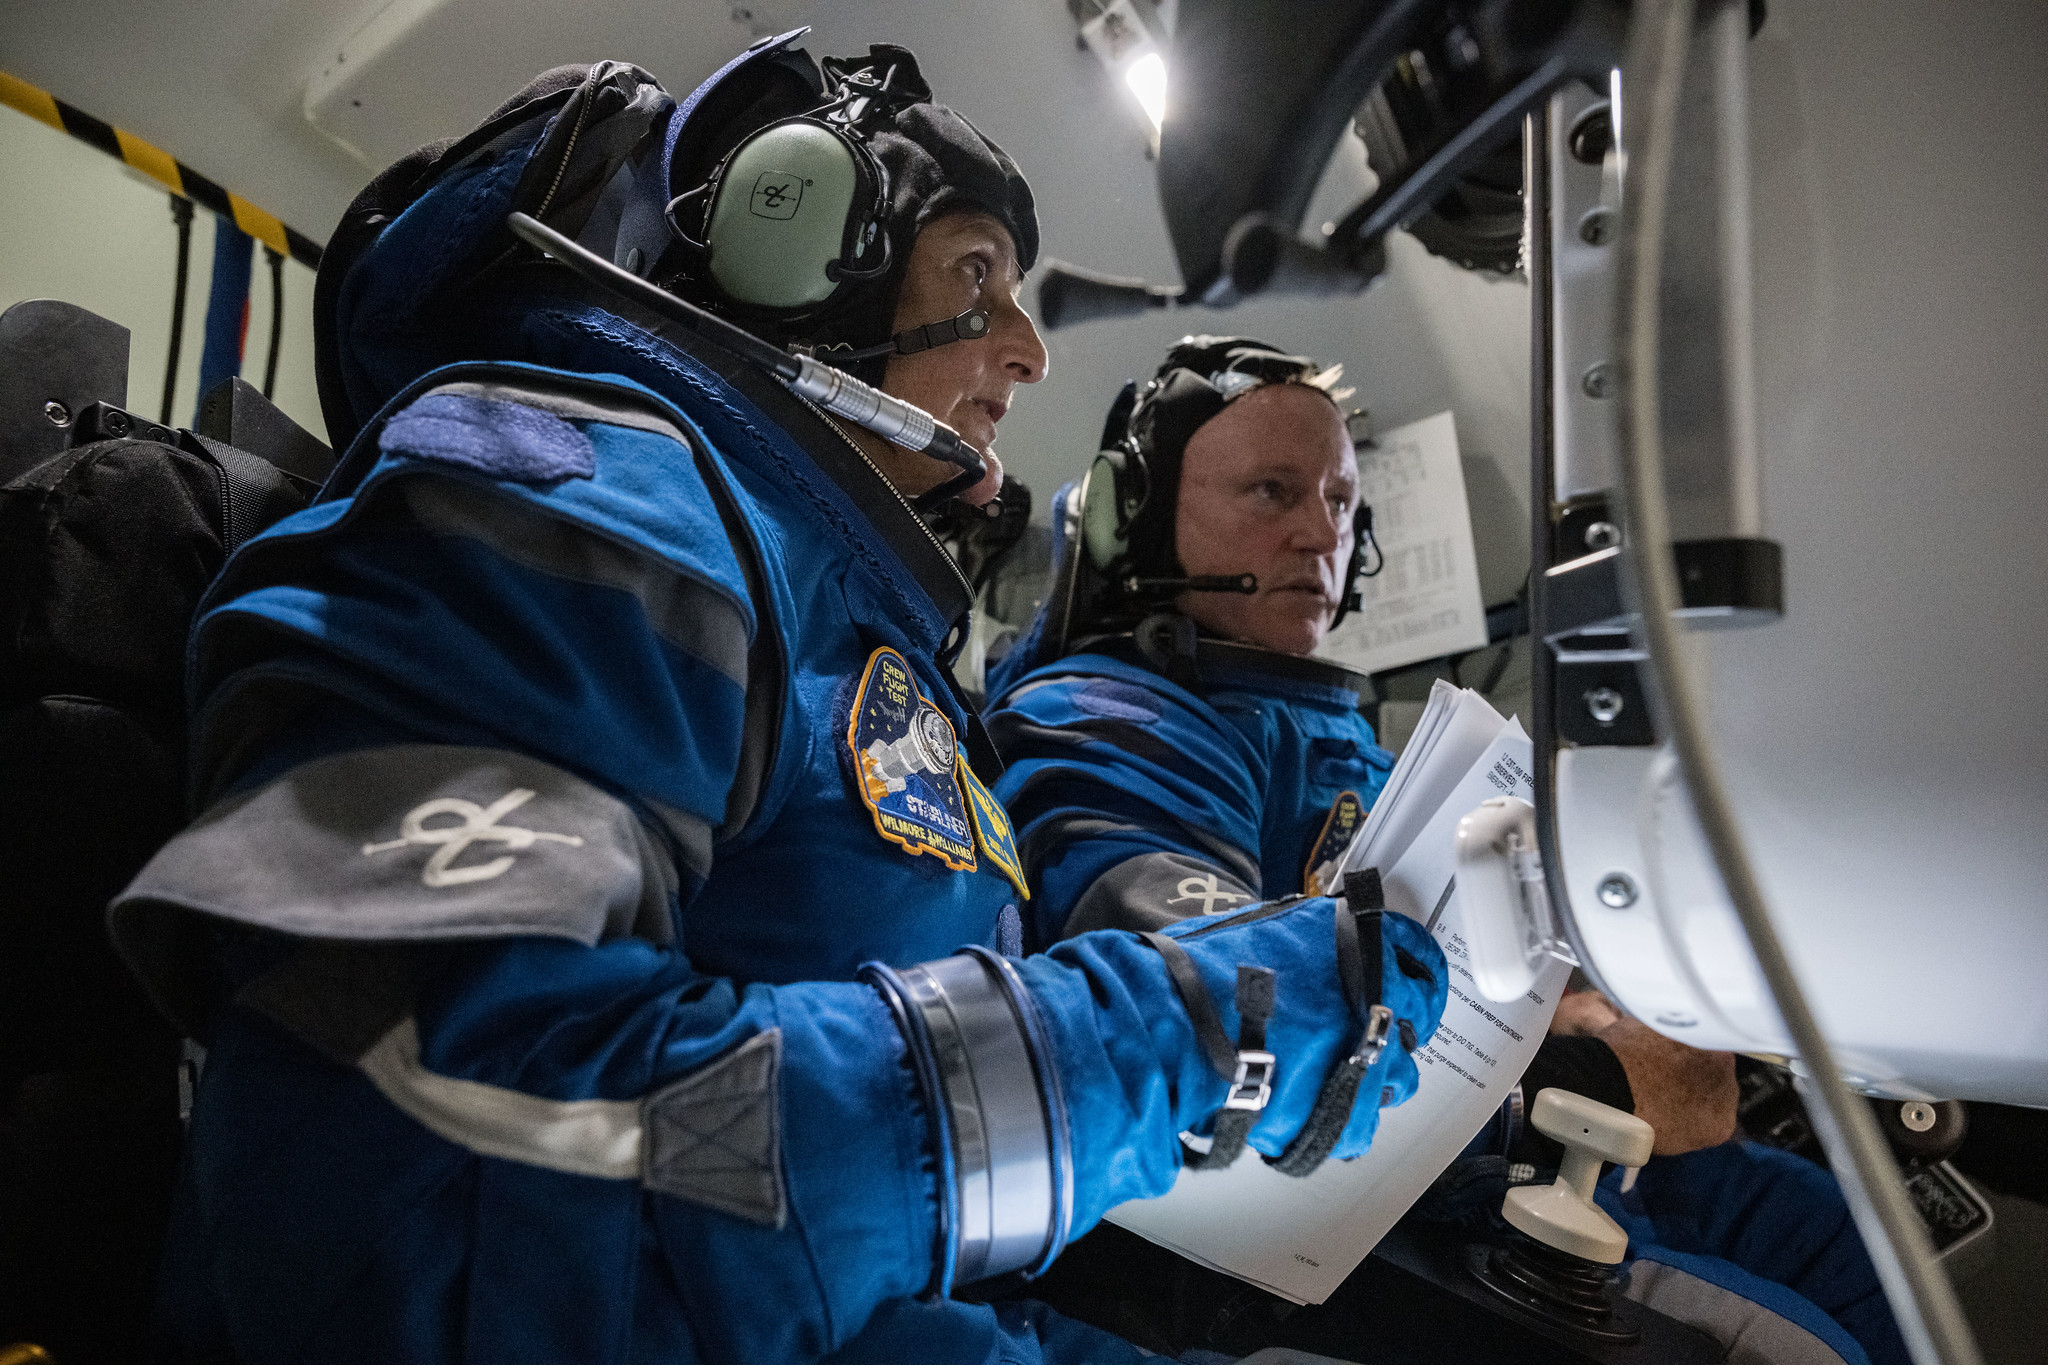 Williams, seated in the foreground, and Wilmore, seated next to her, wear blue spacesuits, gloves, and headsets as they study a monitor in front of them. Williams is holding a sheaf of papers in her right hand.